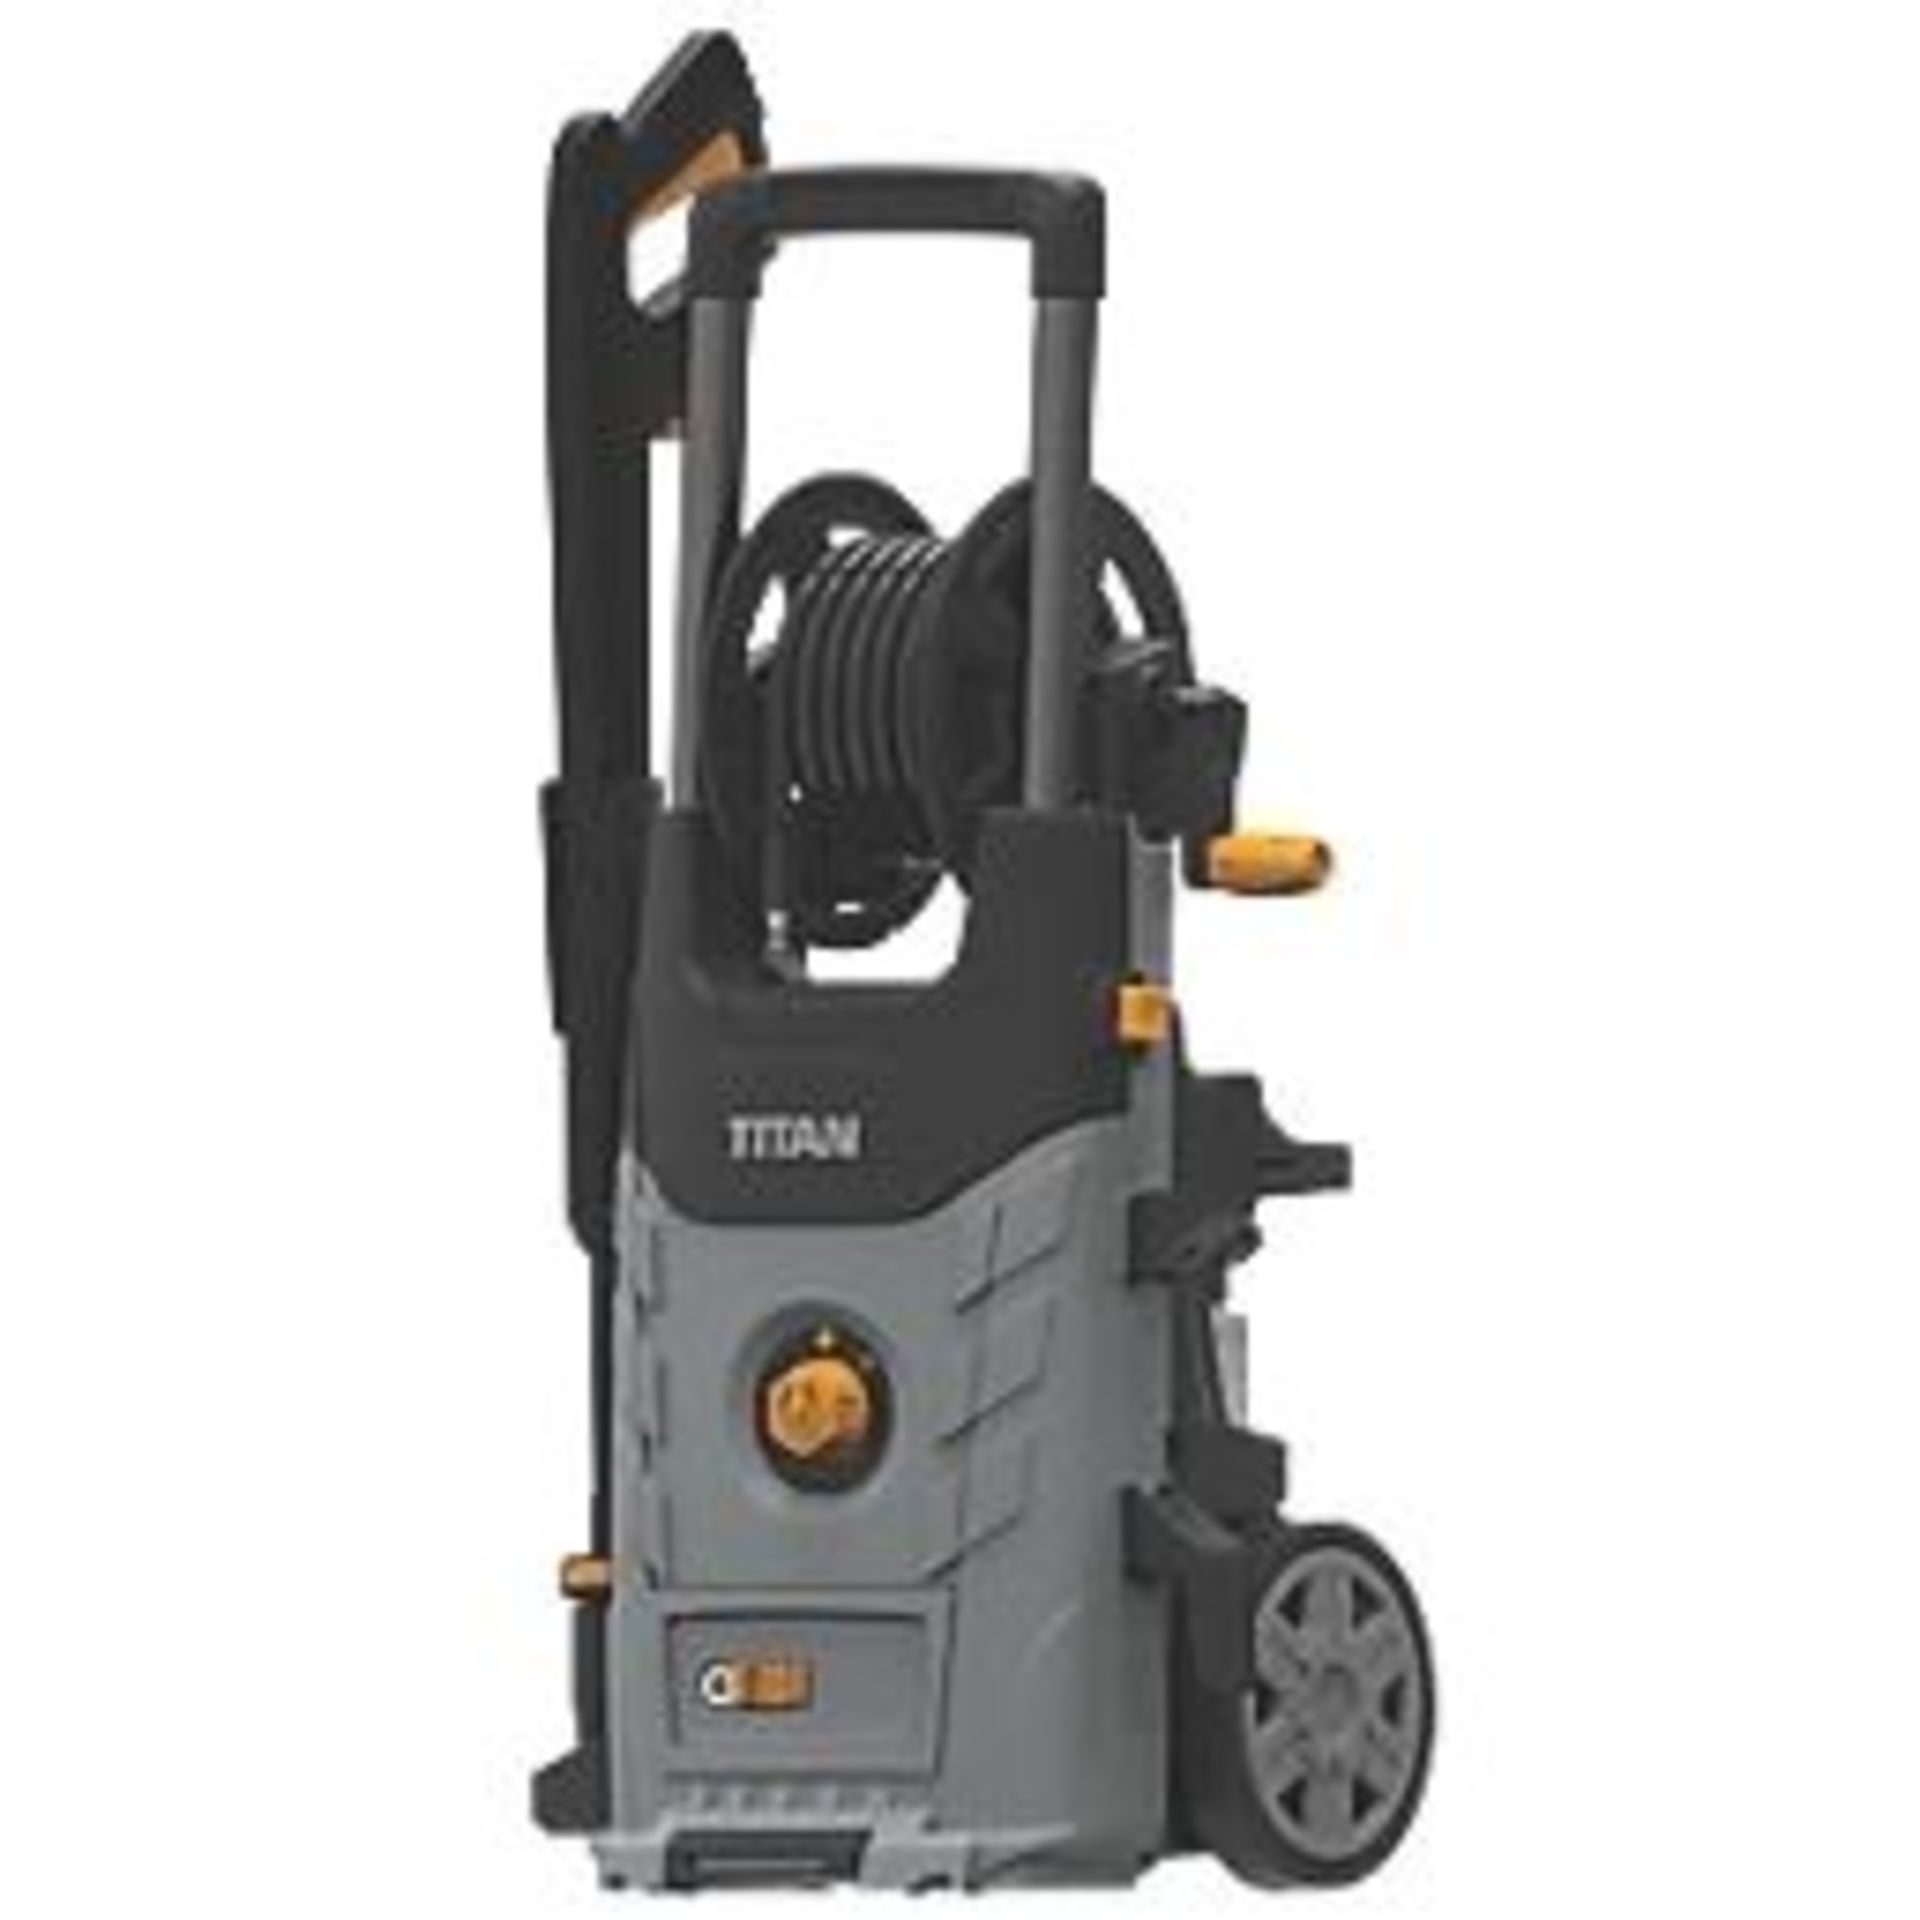 TITAN TTB2200PRW 150BAR ELECTRIC HIGH PRESSURE WASHER 2.2KW 230V. - S2.2. Compact design with